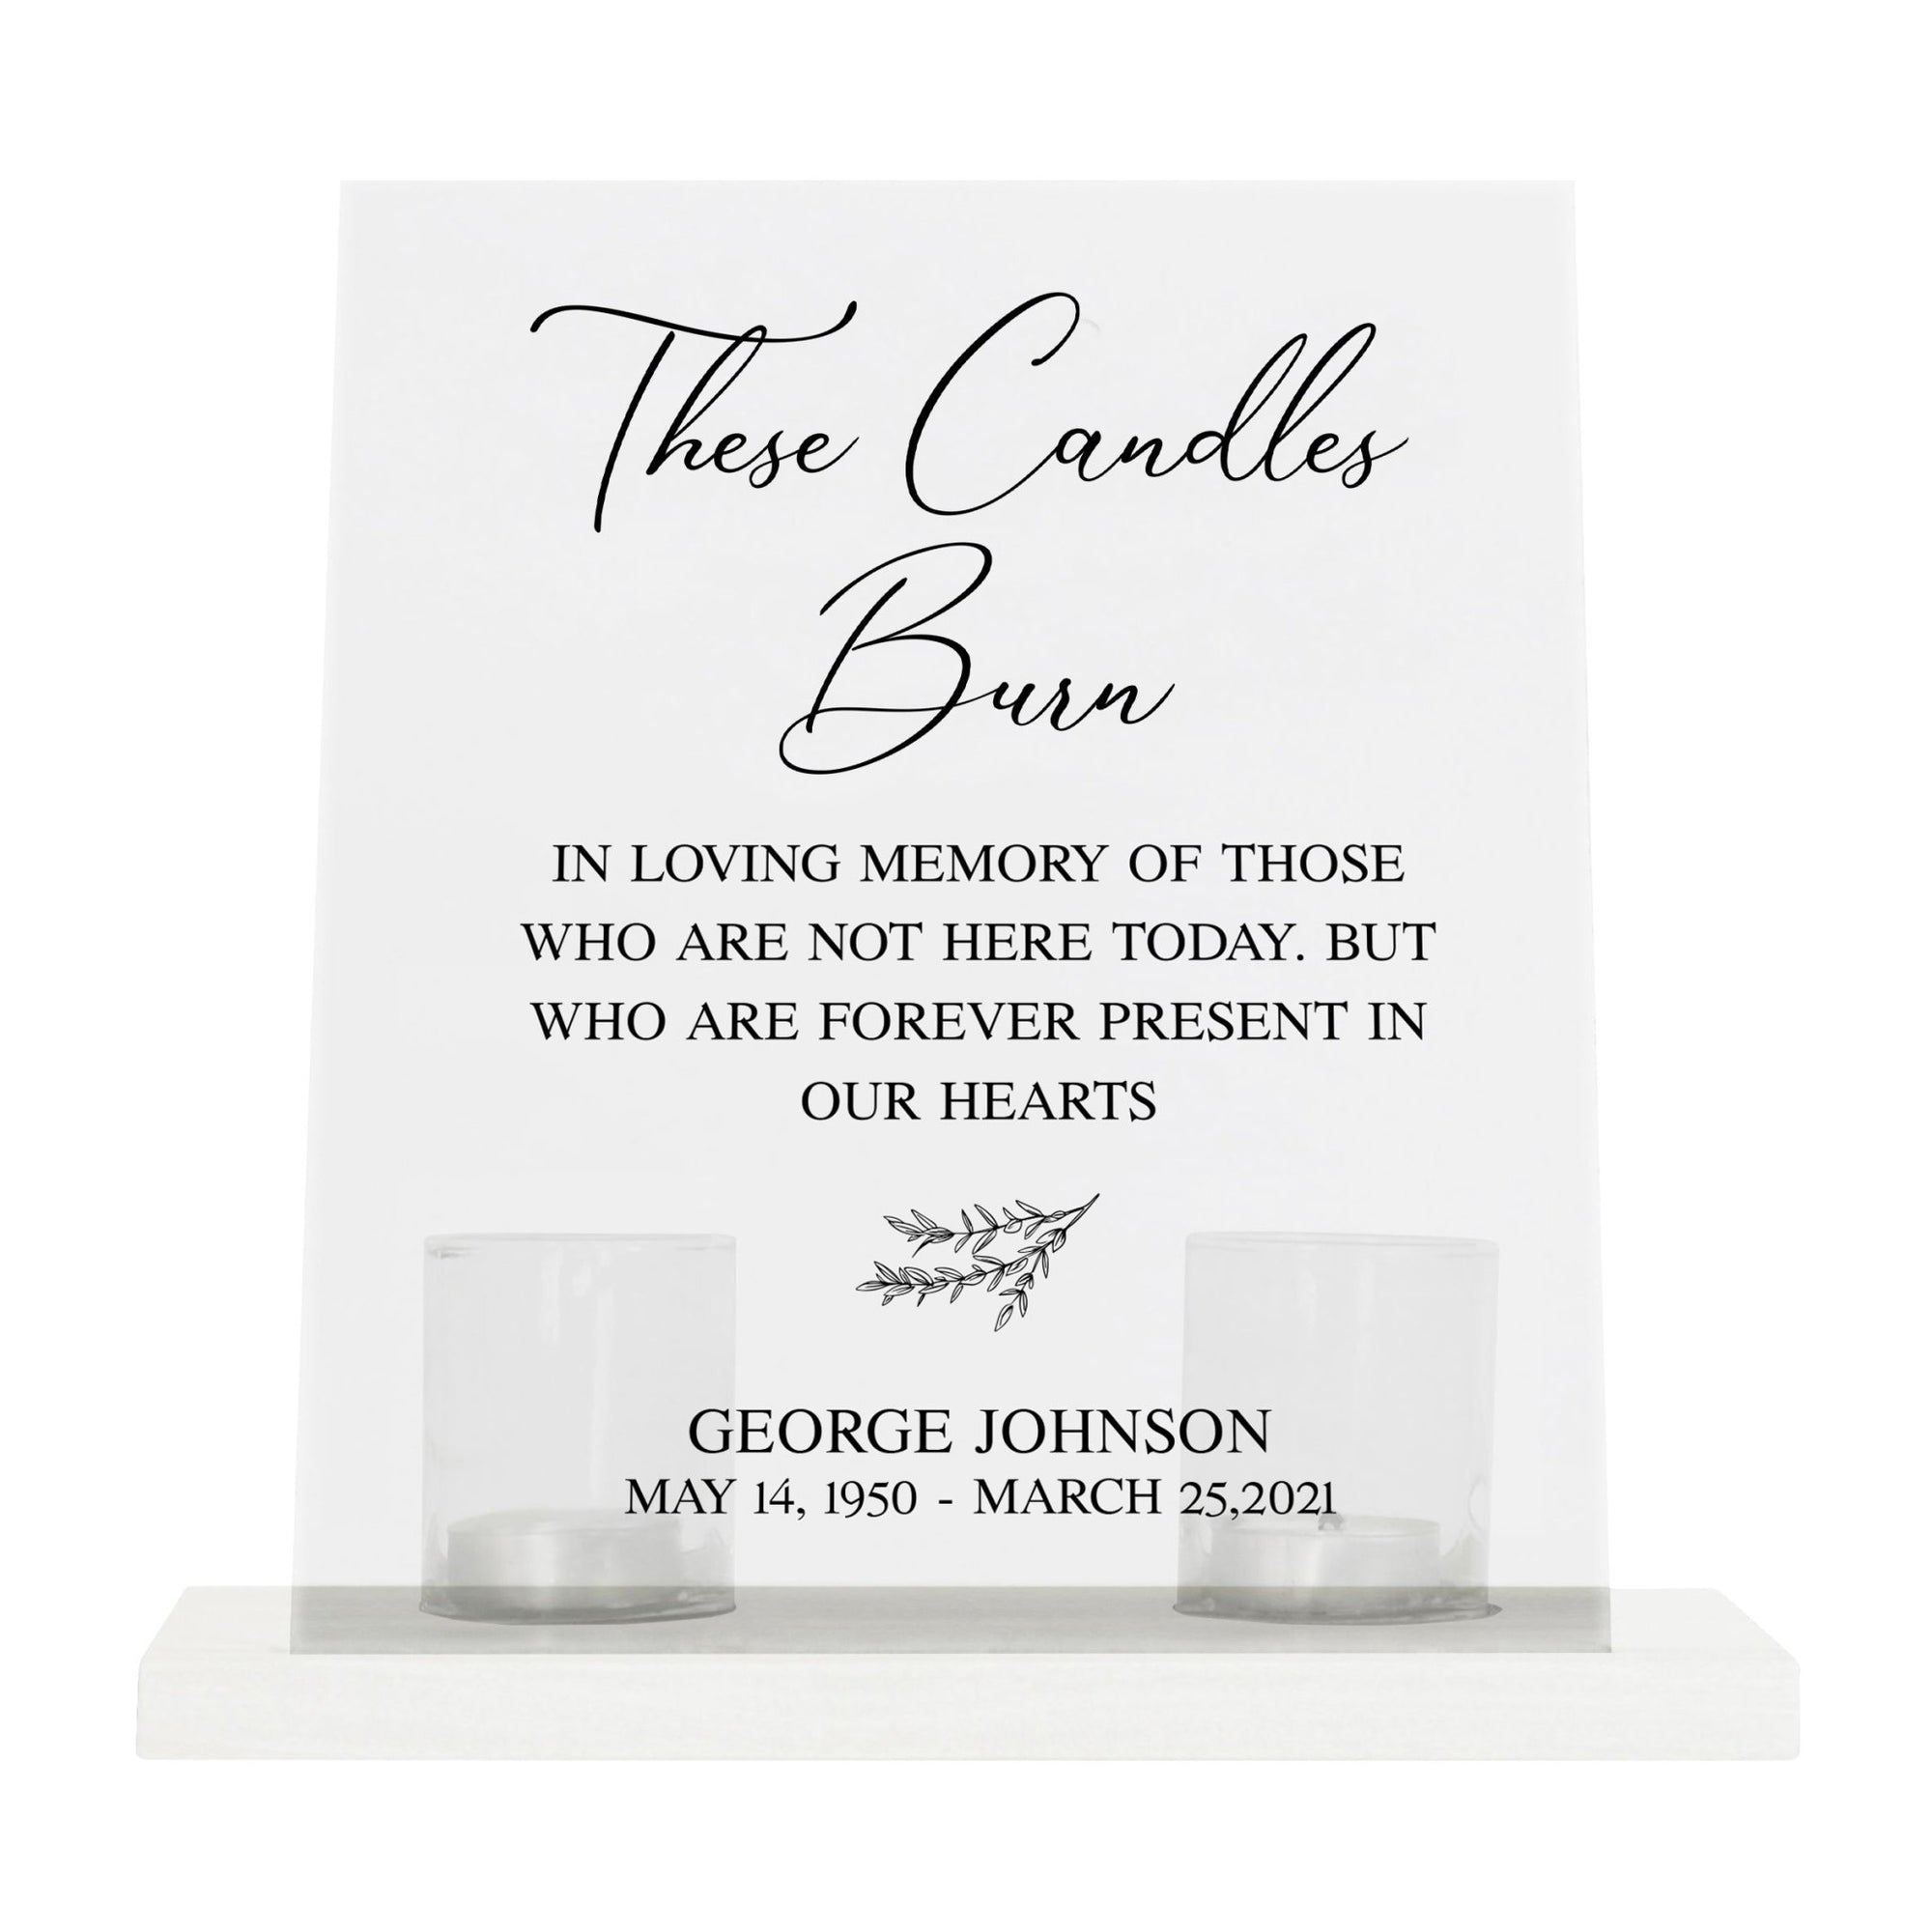 Custom Memorial 8x10 Acrylic Wall Sign with Wooden Base Votive Candle Holder - The Candle Burns - LifeSong Milestones